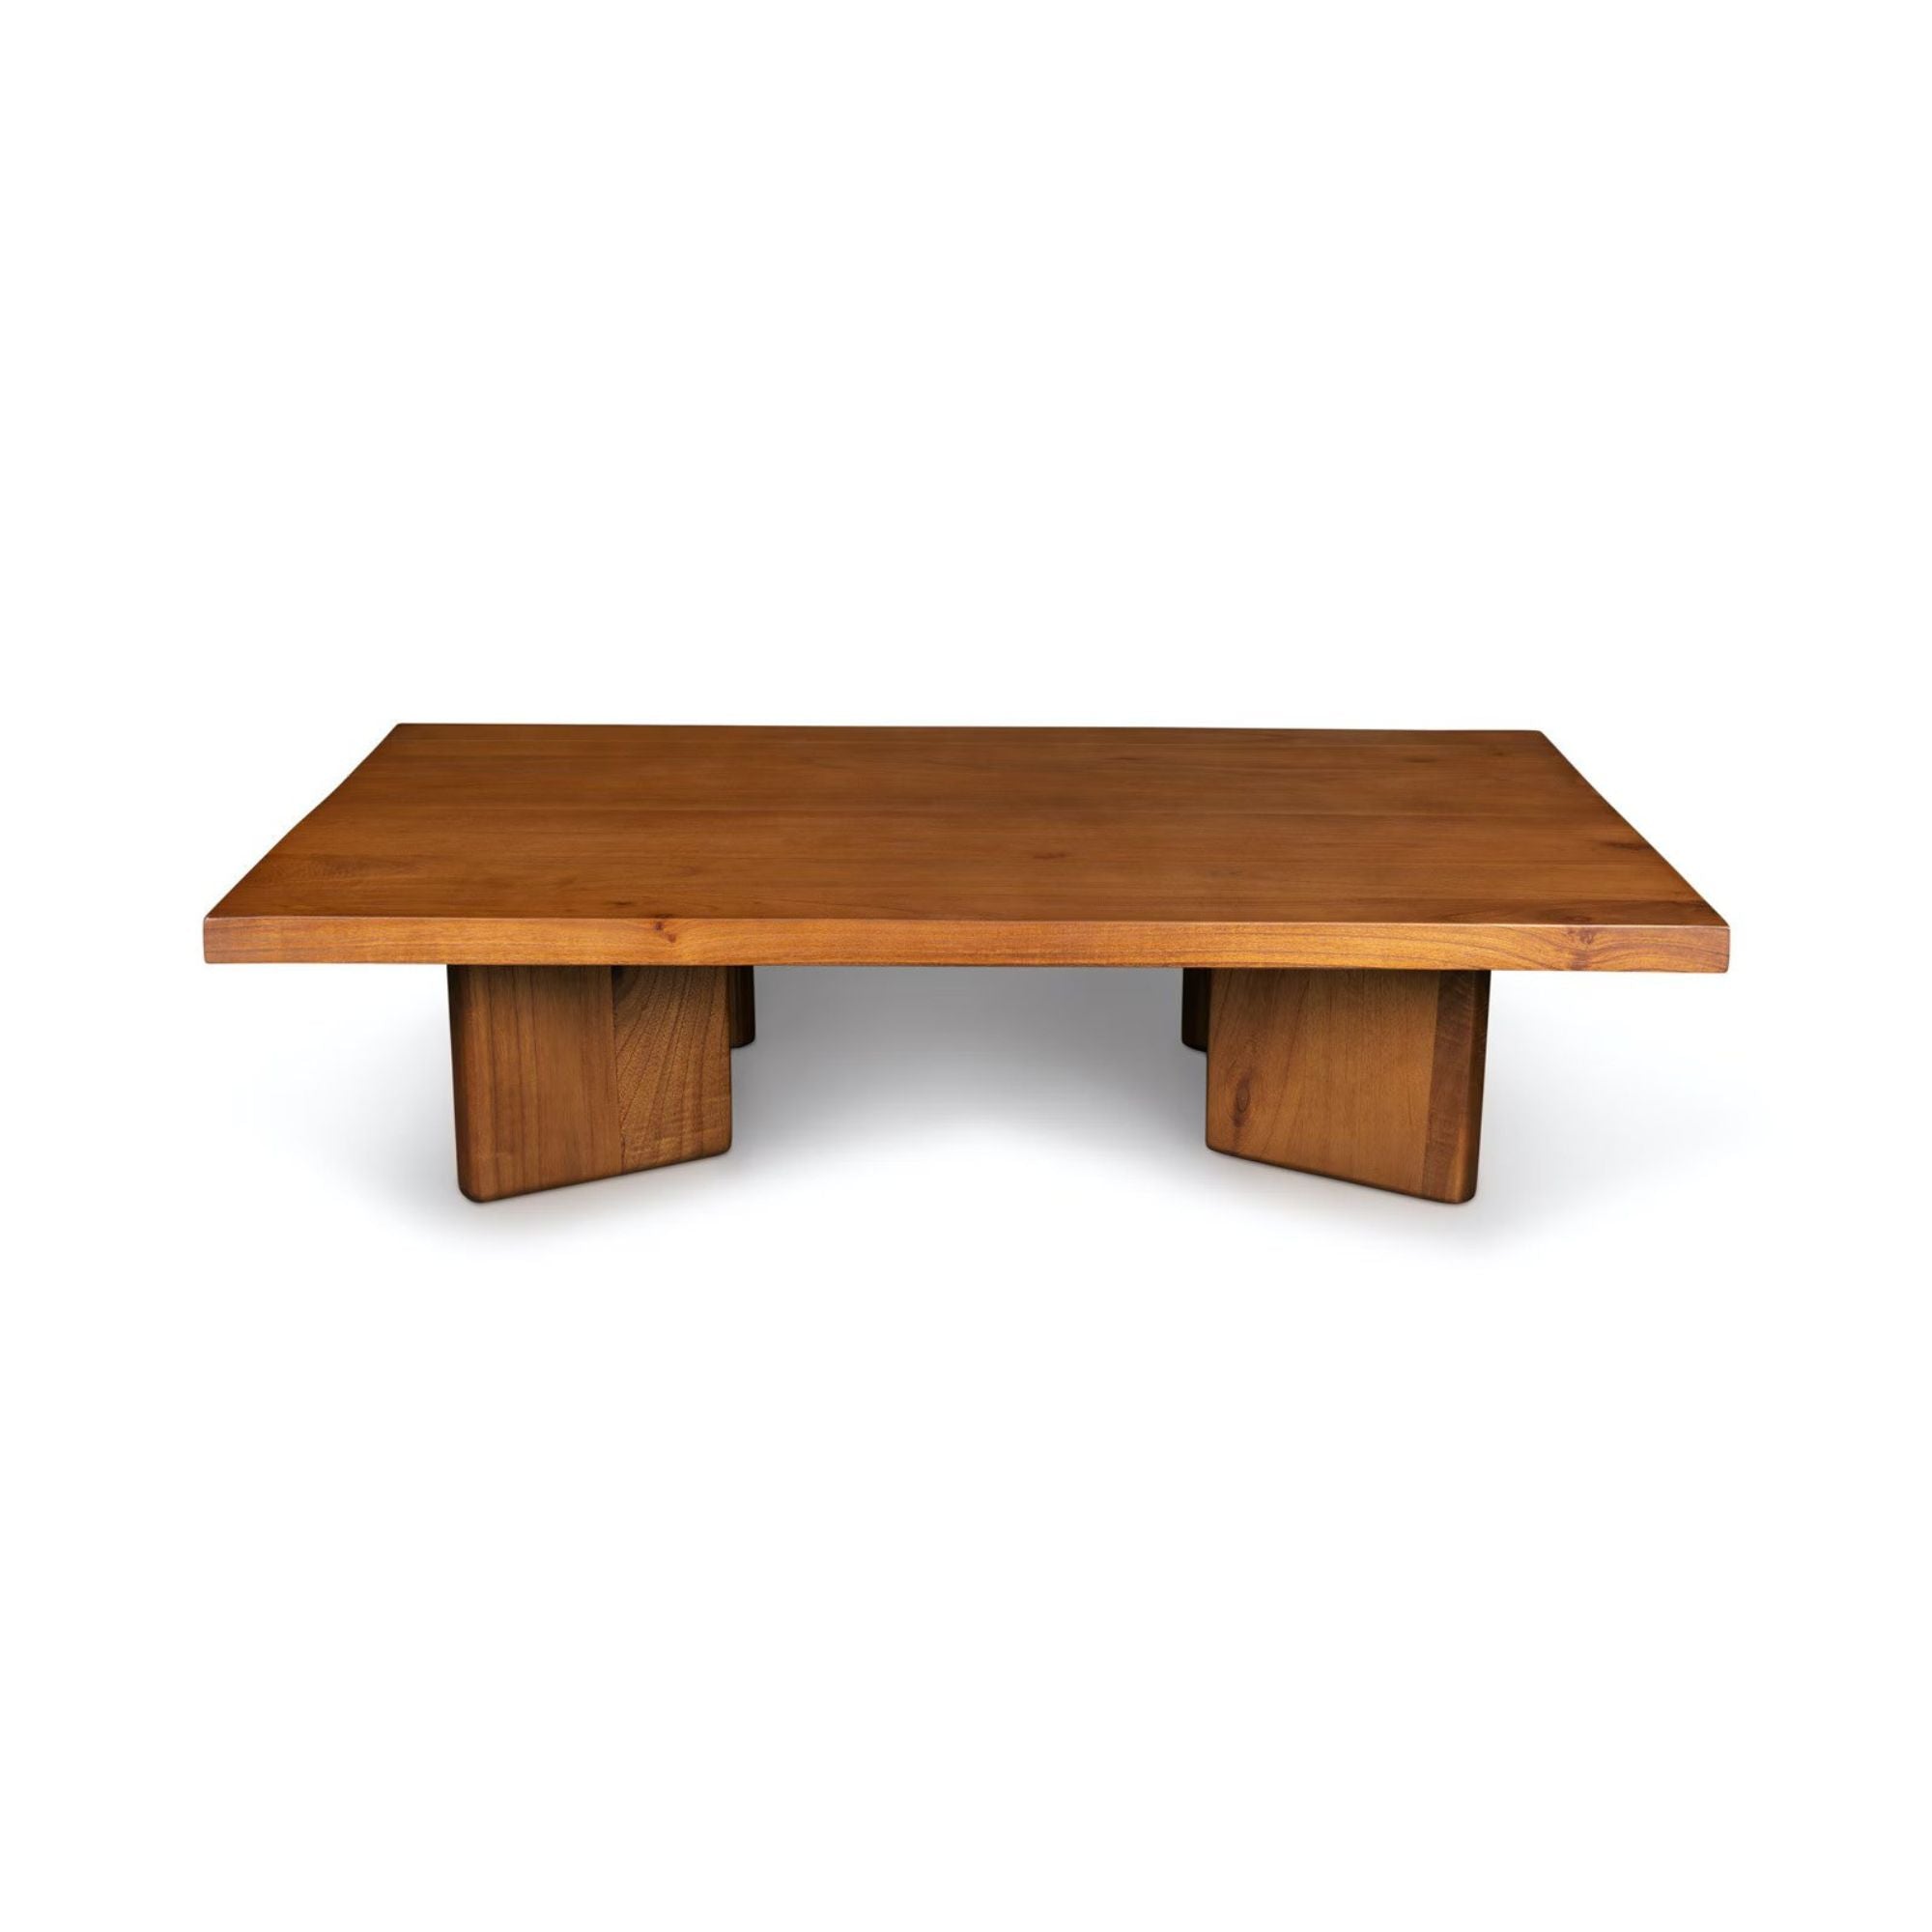 Chandigarh Coffee Table - THAT COOL LIVING